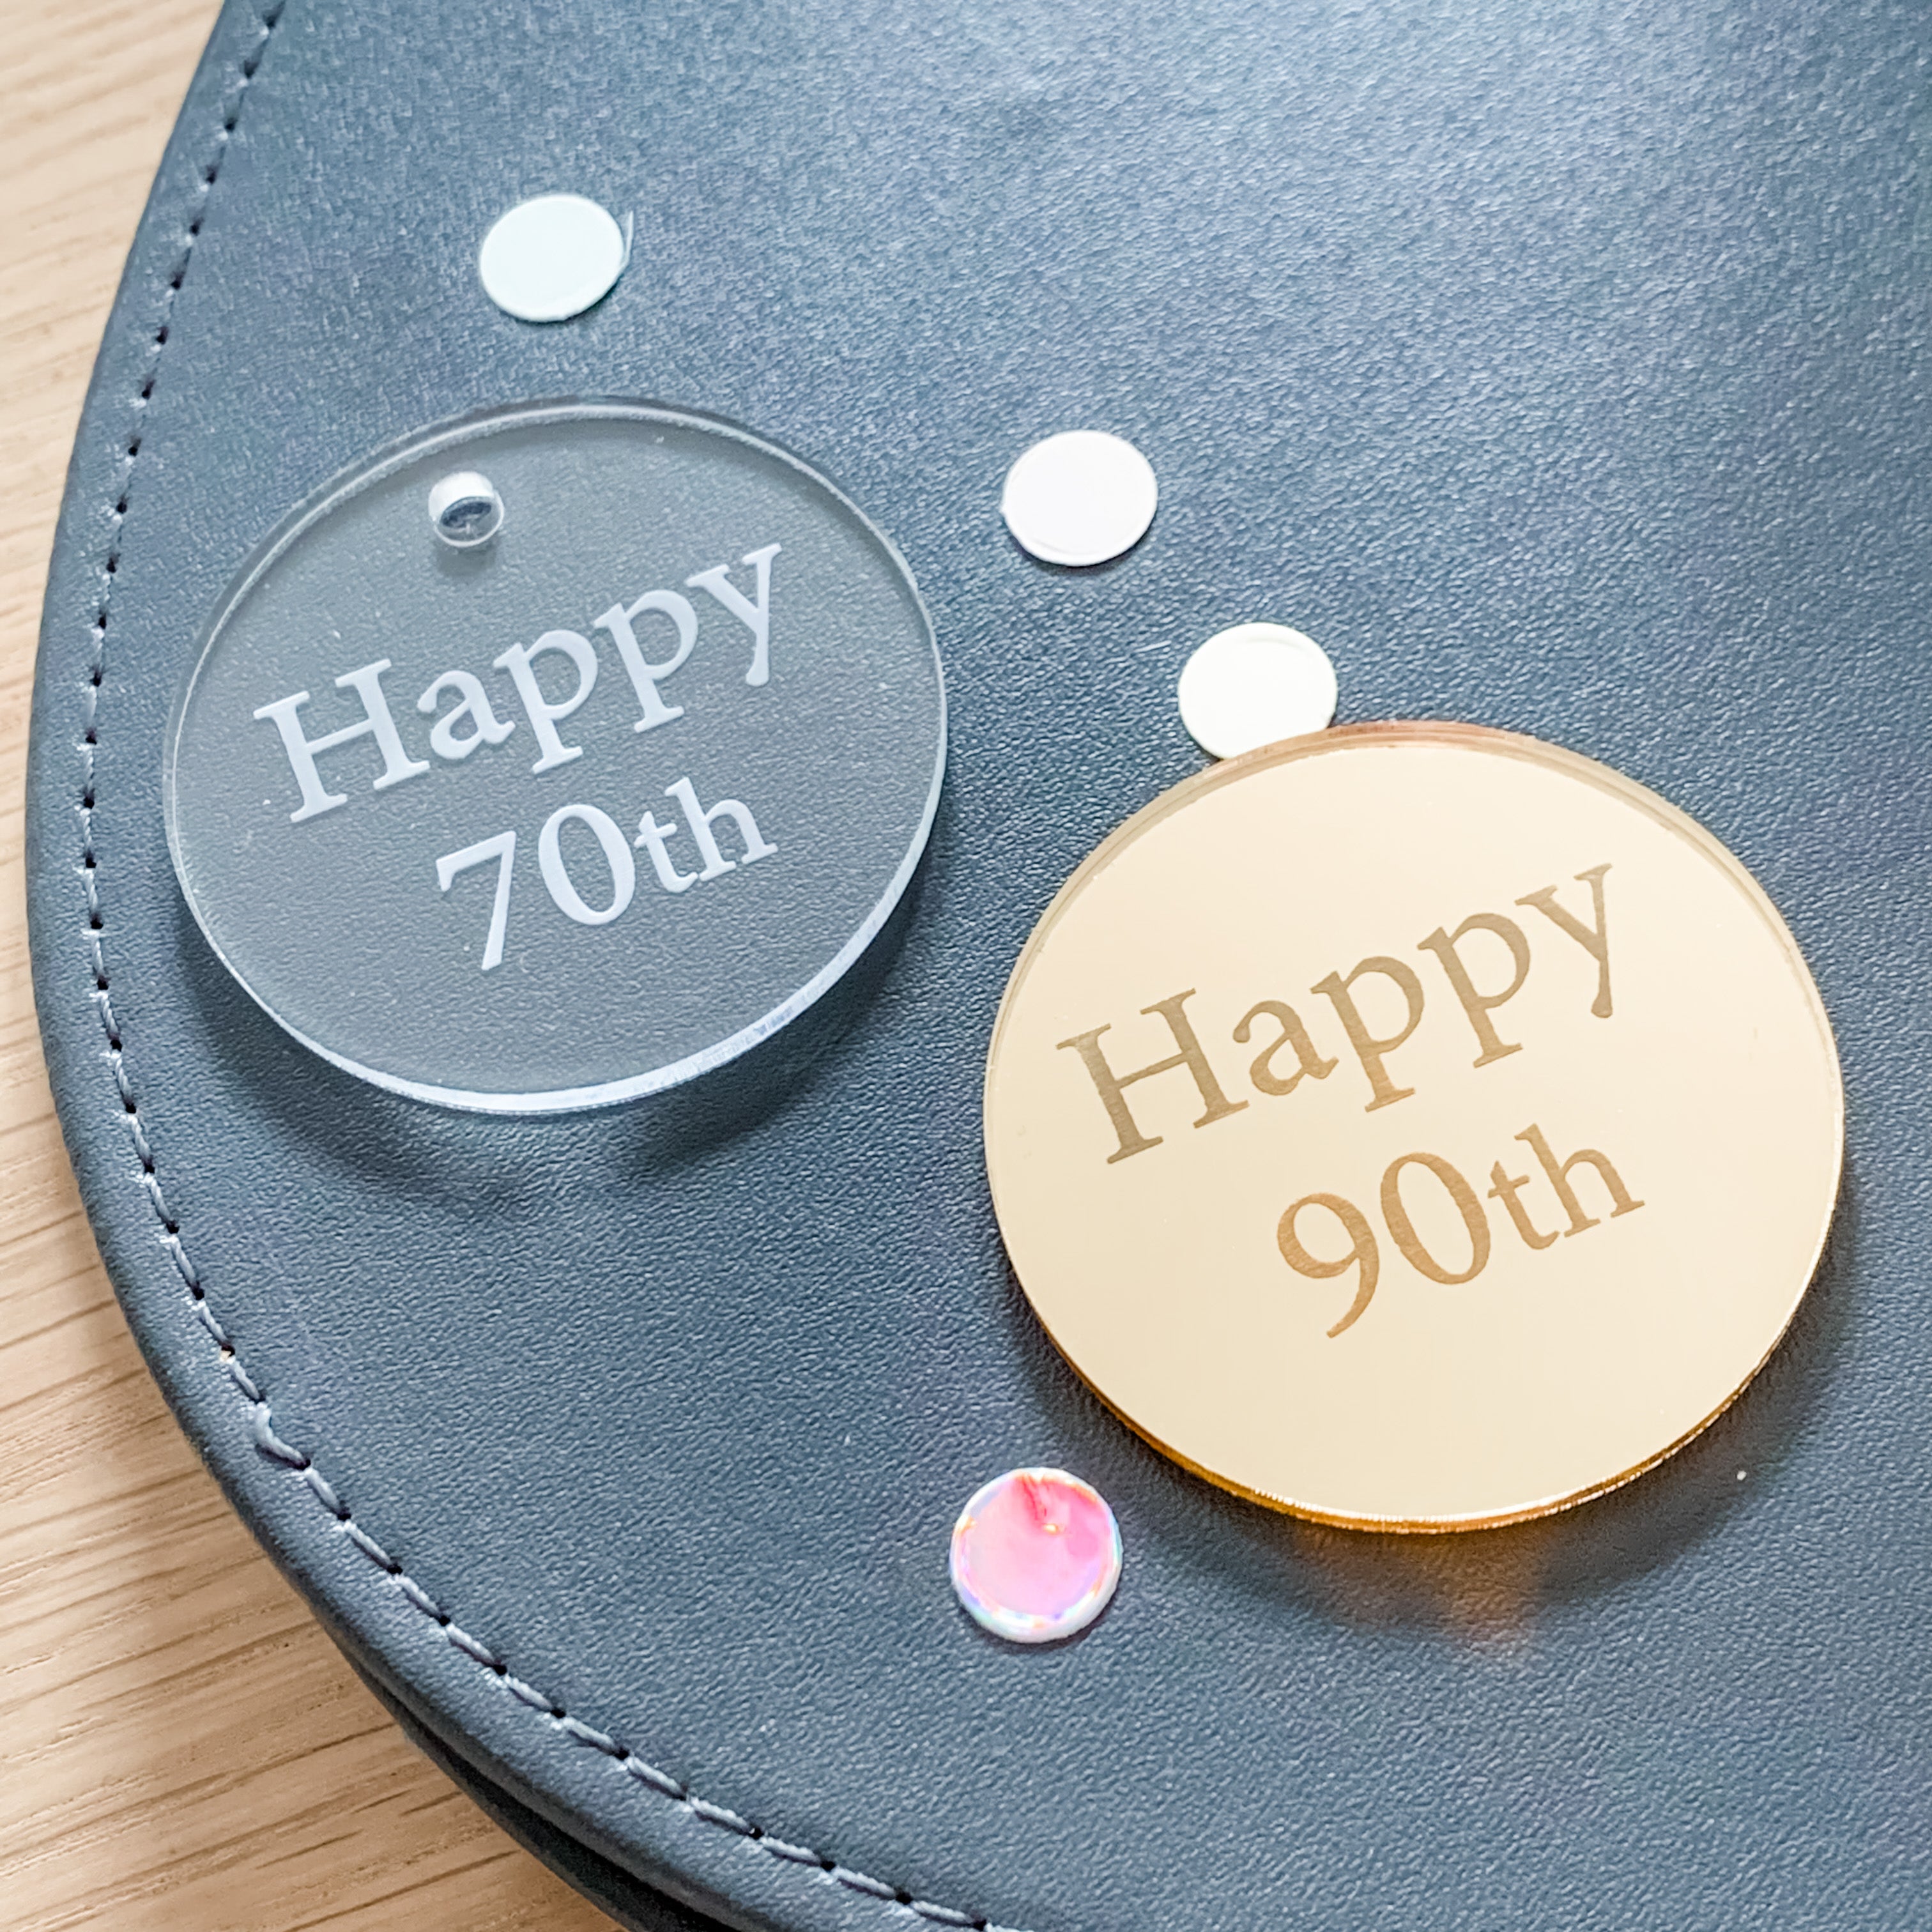 Happy 70th, 90th Gift Tags